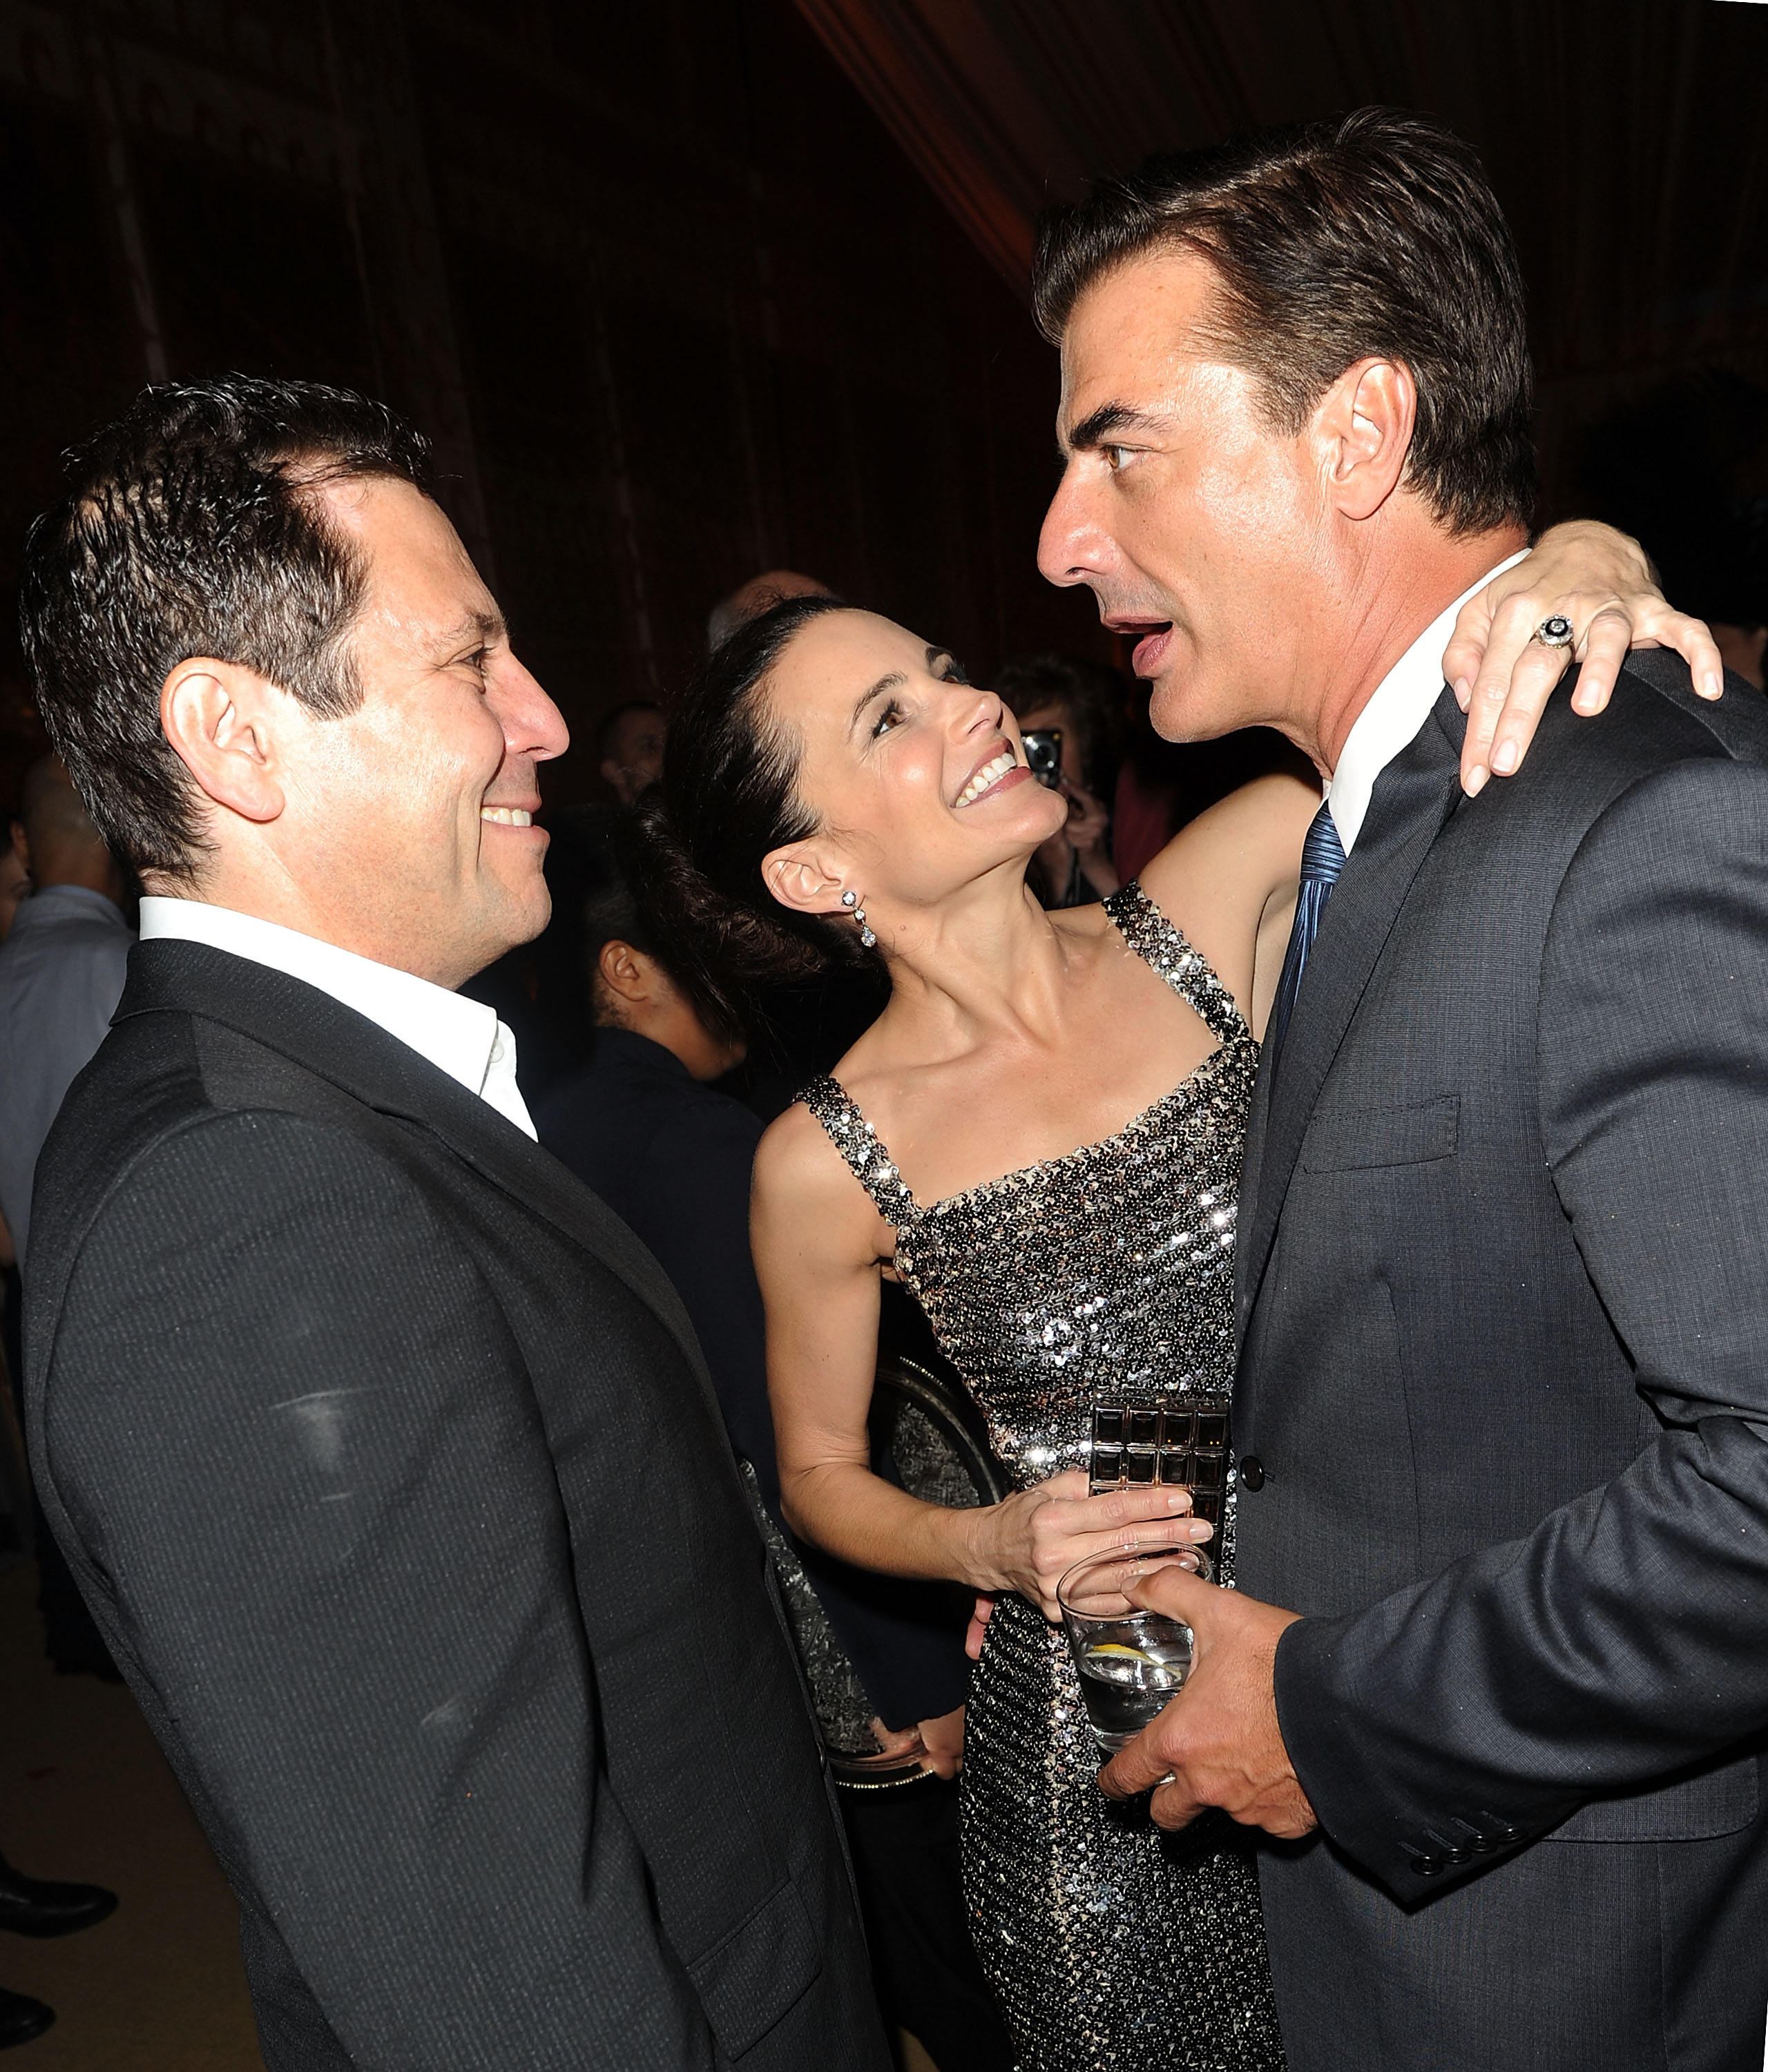 Darren Star, Kristin Davis, and Chris Noth attend a party celebrating 'Sex and the City 2' at Lincoln Center for the Performing Arts